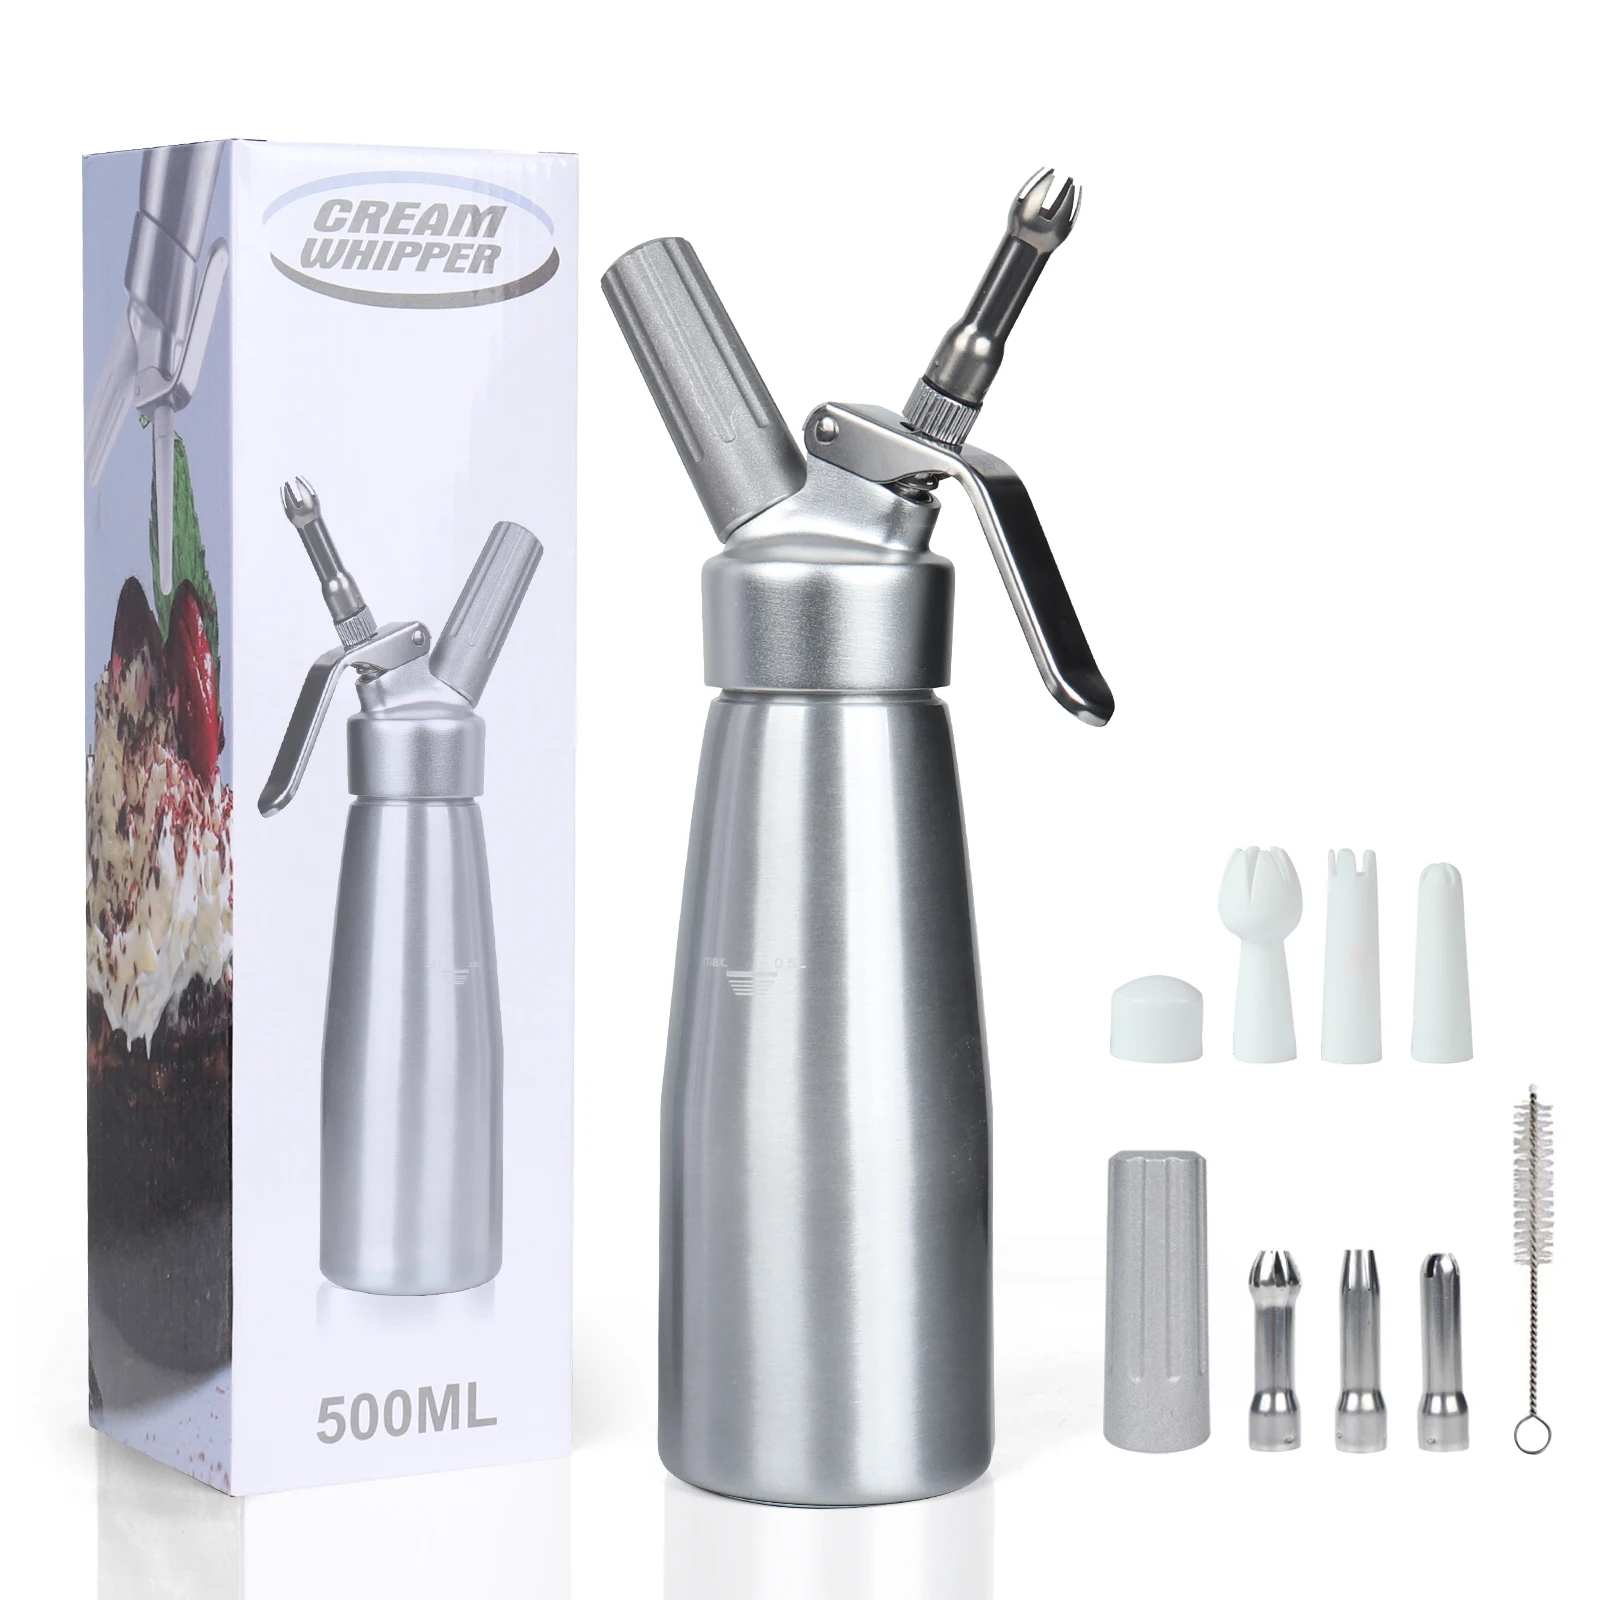 

103-0012 Customized 500ML Stainless Steel Professional Whipped Cream Dispenser with 3 Nozzles Whipped Cream Dispen